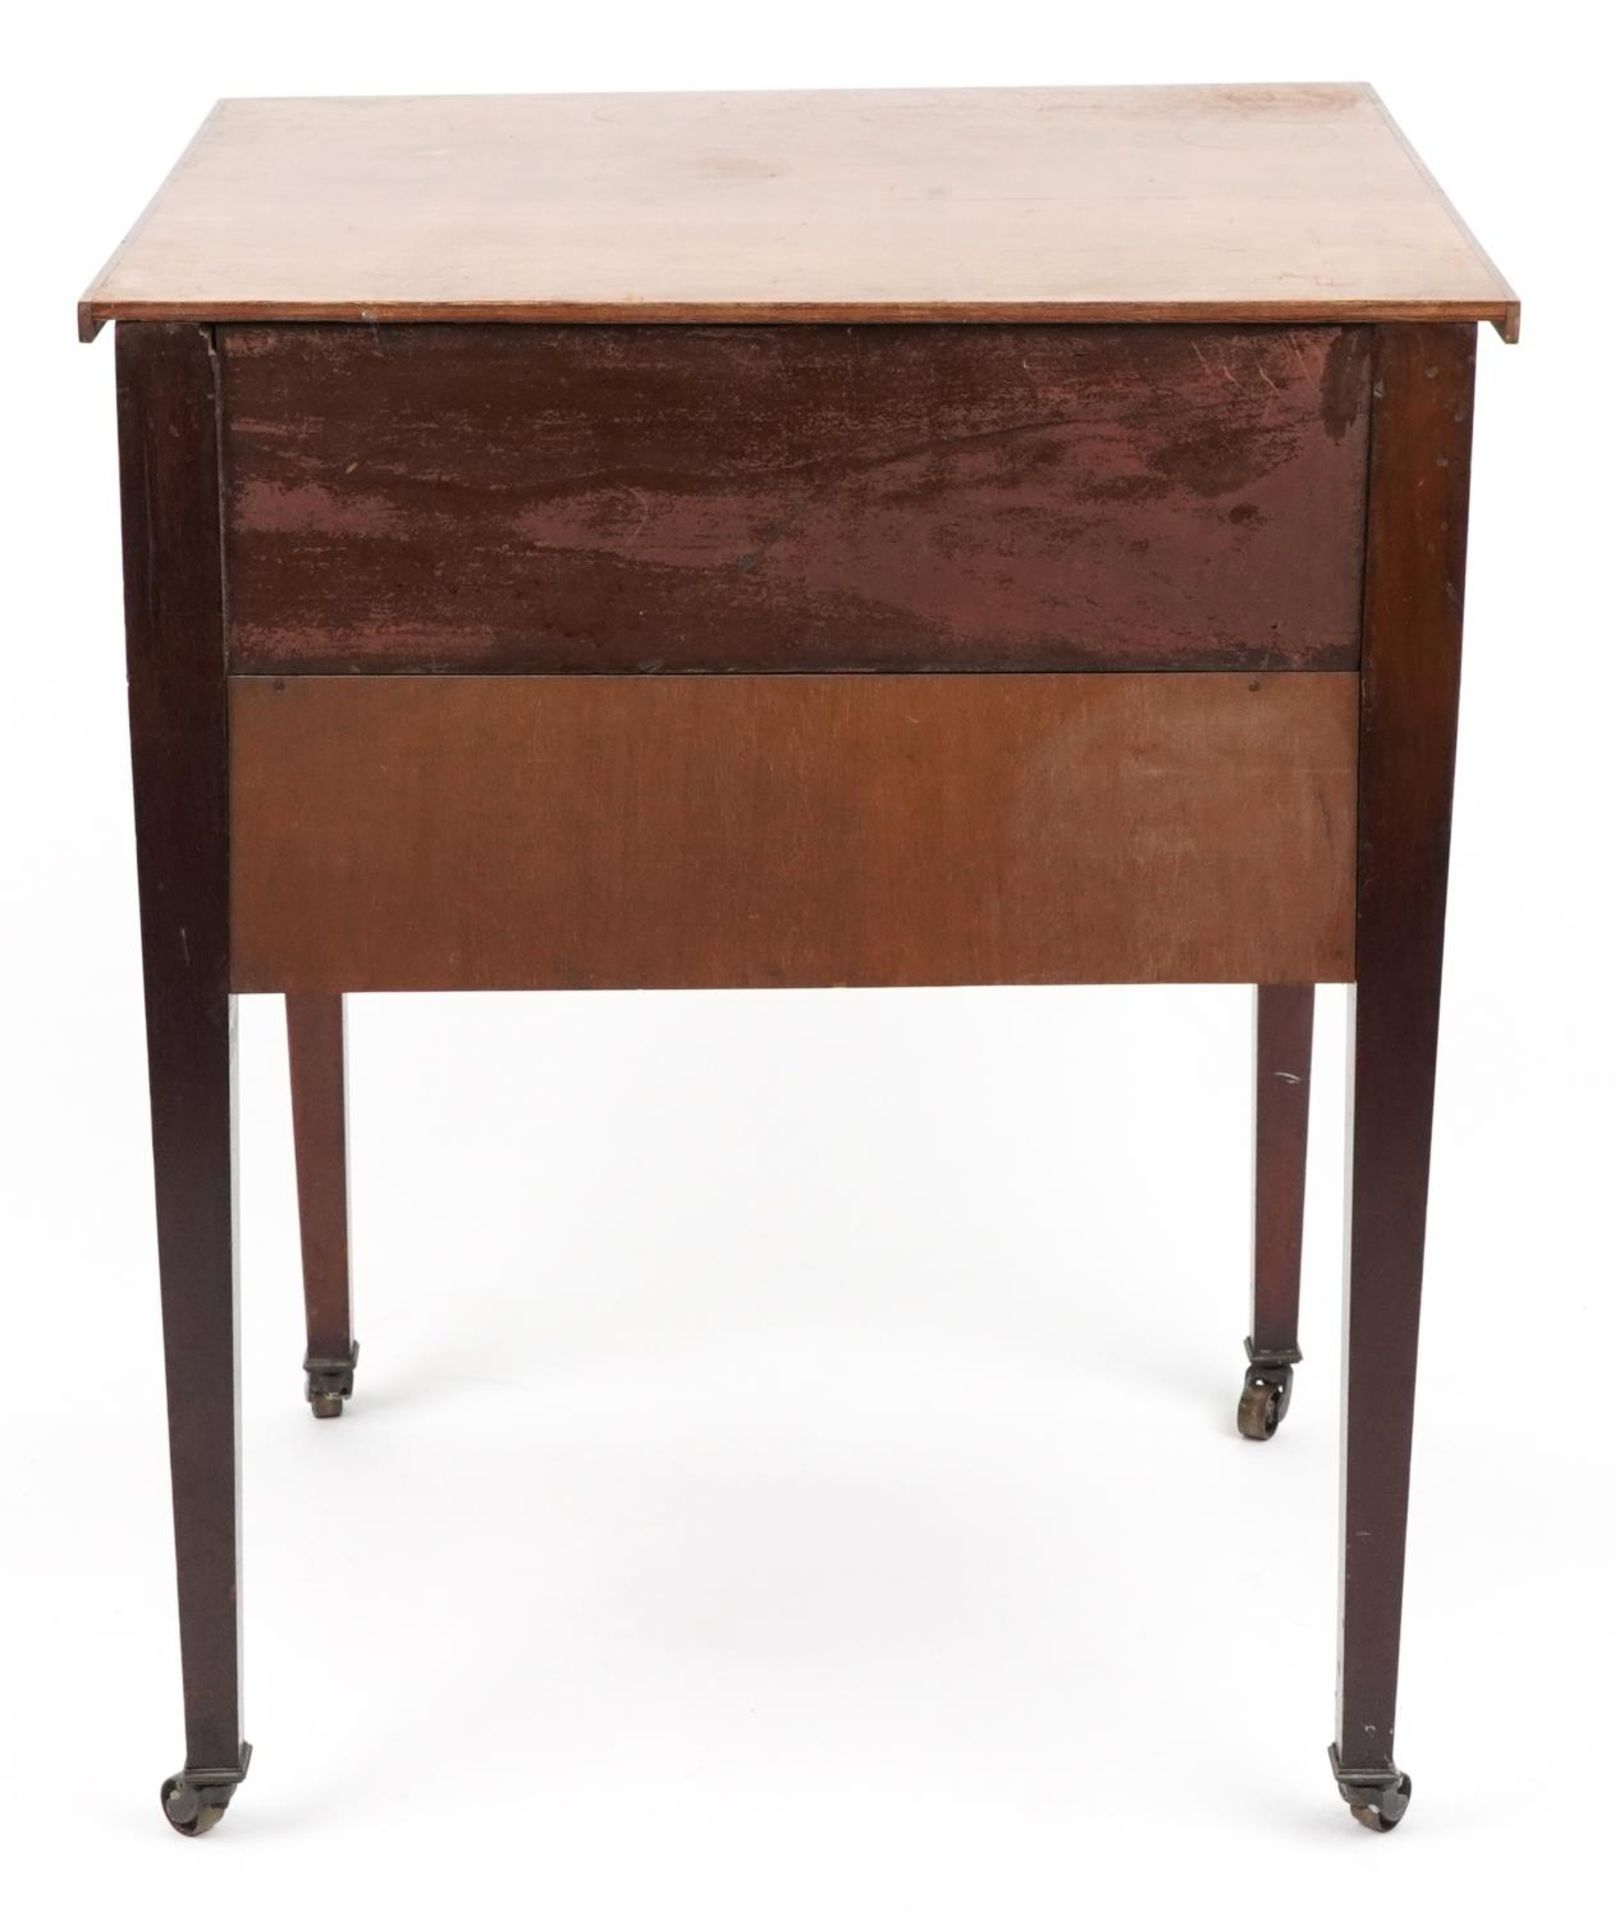 Jas Shoolbred & Co, Edwardian inlaid mahogany two drawer side table on tapering legs, 76cm H x - Image 6 of 6